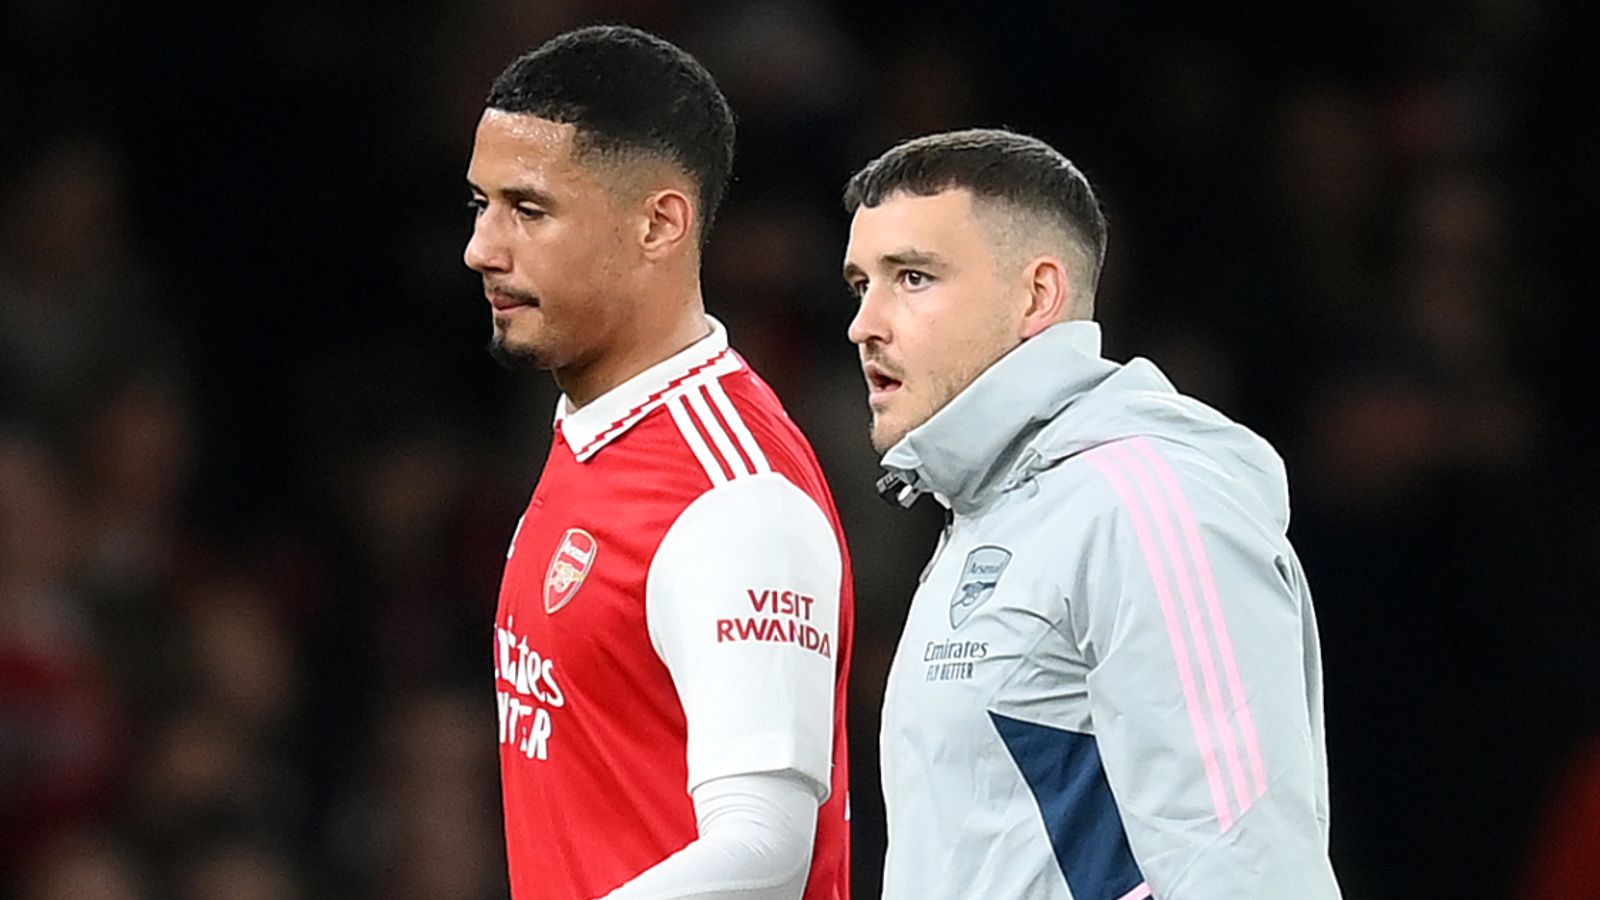 Jamie Carragher: Arsenal nonetheless lack a dominant centre-back and it is a fable William Saliba’s harm price them the title